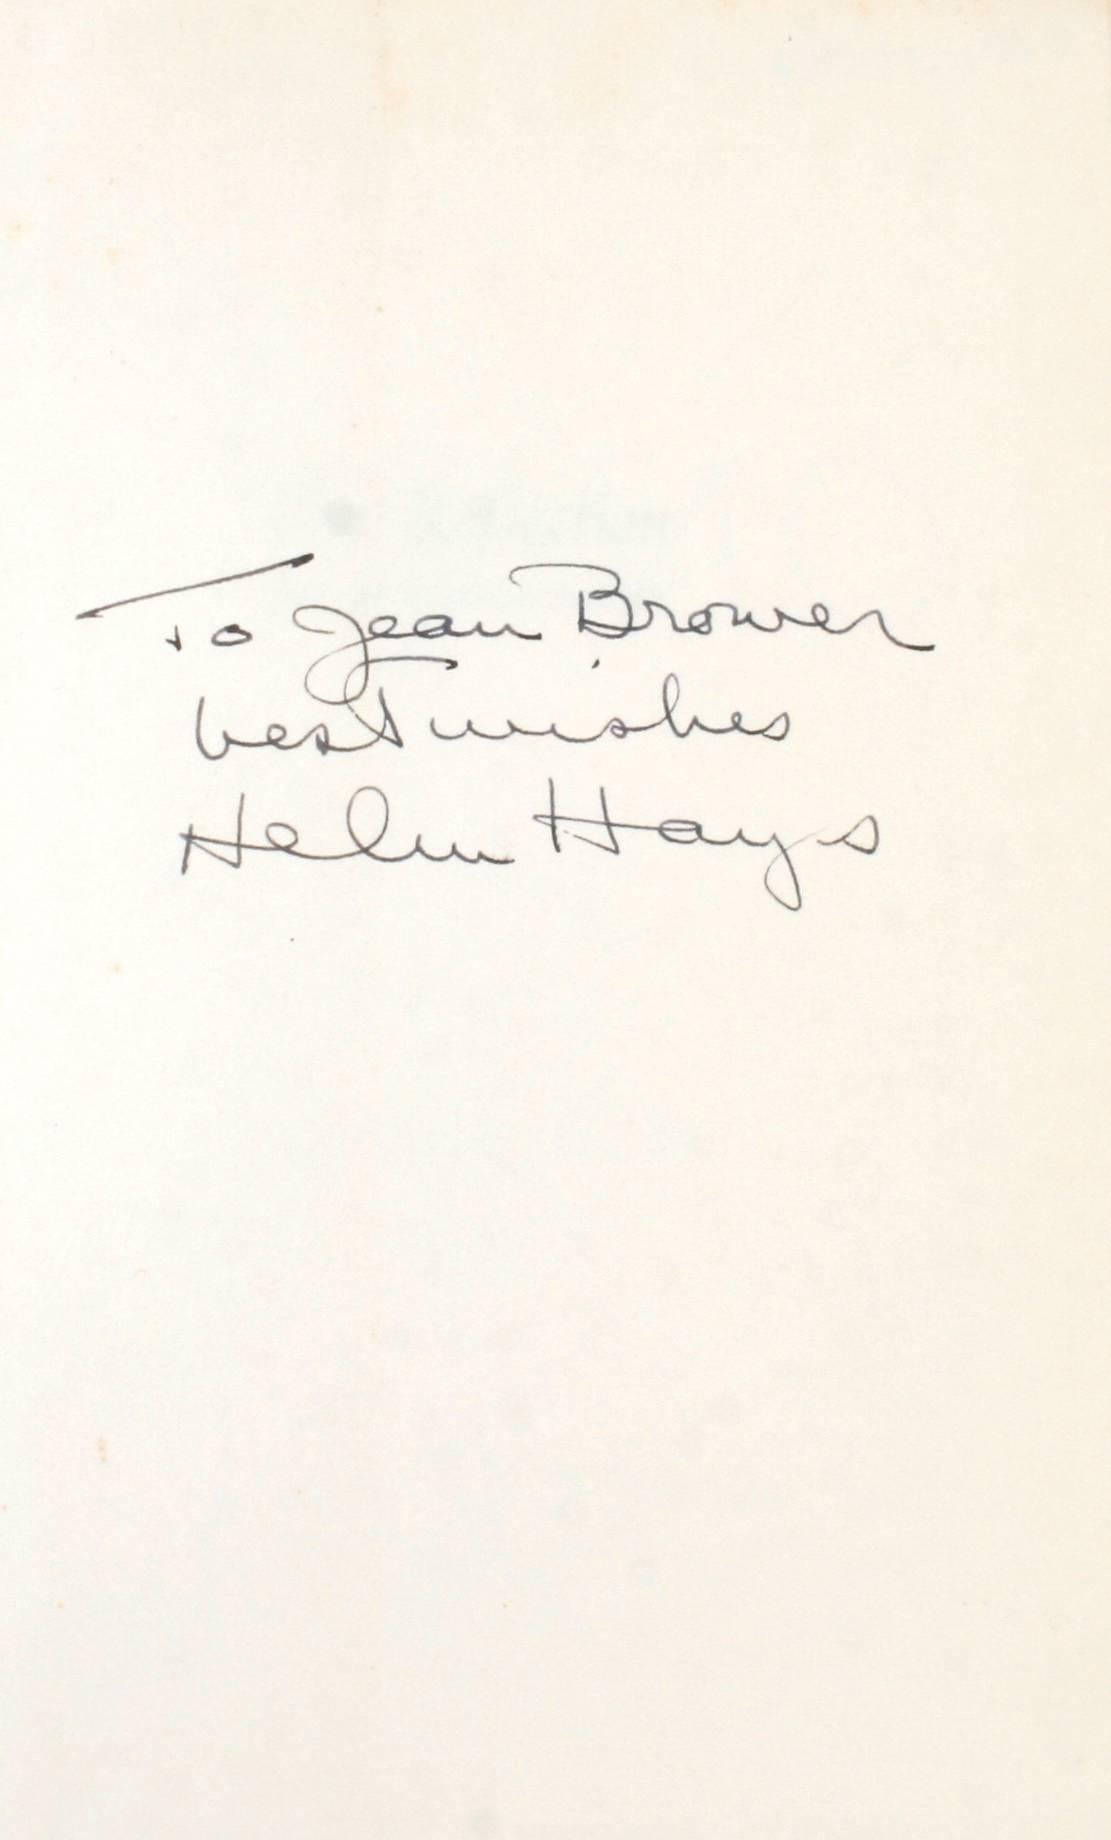 Helen Hayes on Reflection An Autobiography. New York: M. Evans and Company, Inc., 1968. Signed third printing hardcover with dust jacket. The autobiography of Helen Hayes that was written for her grandchildren. The book has family stories, backstage